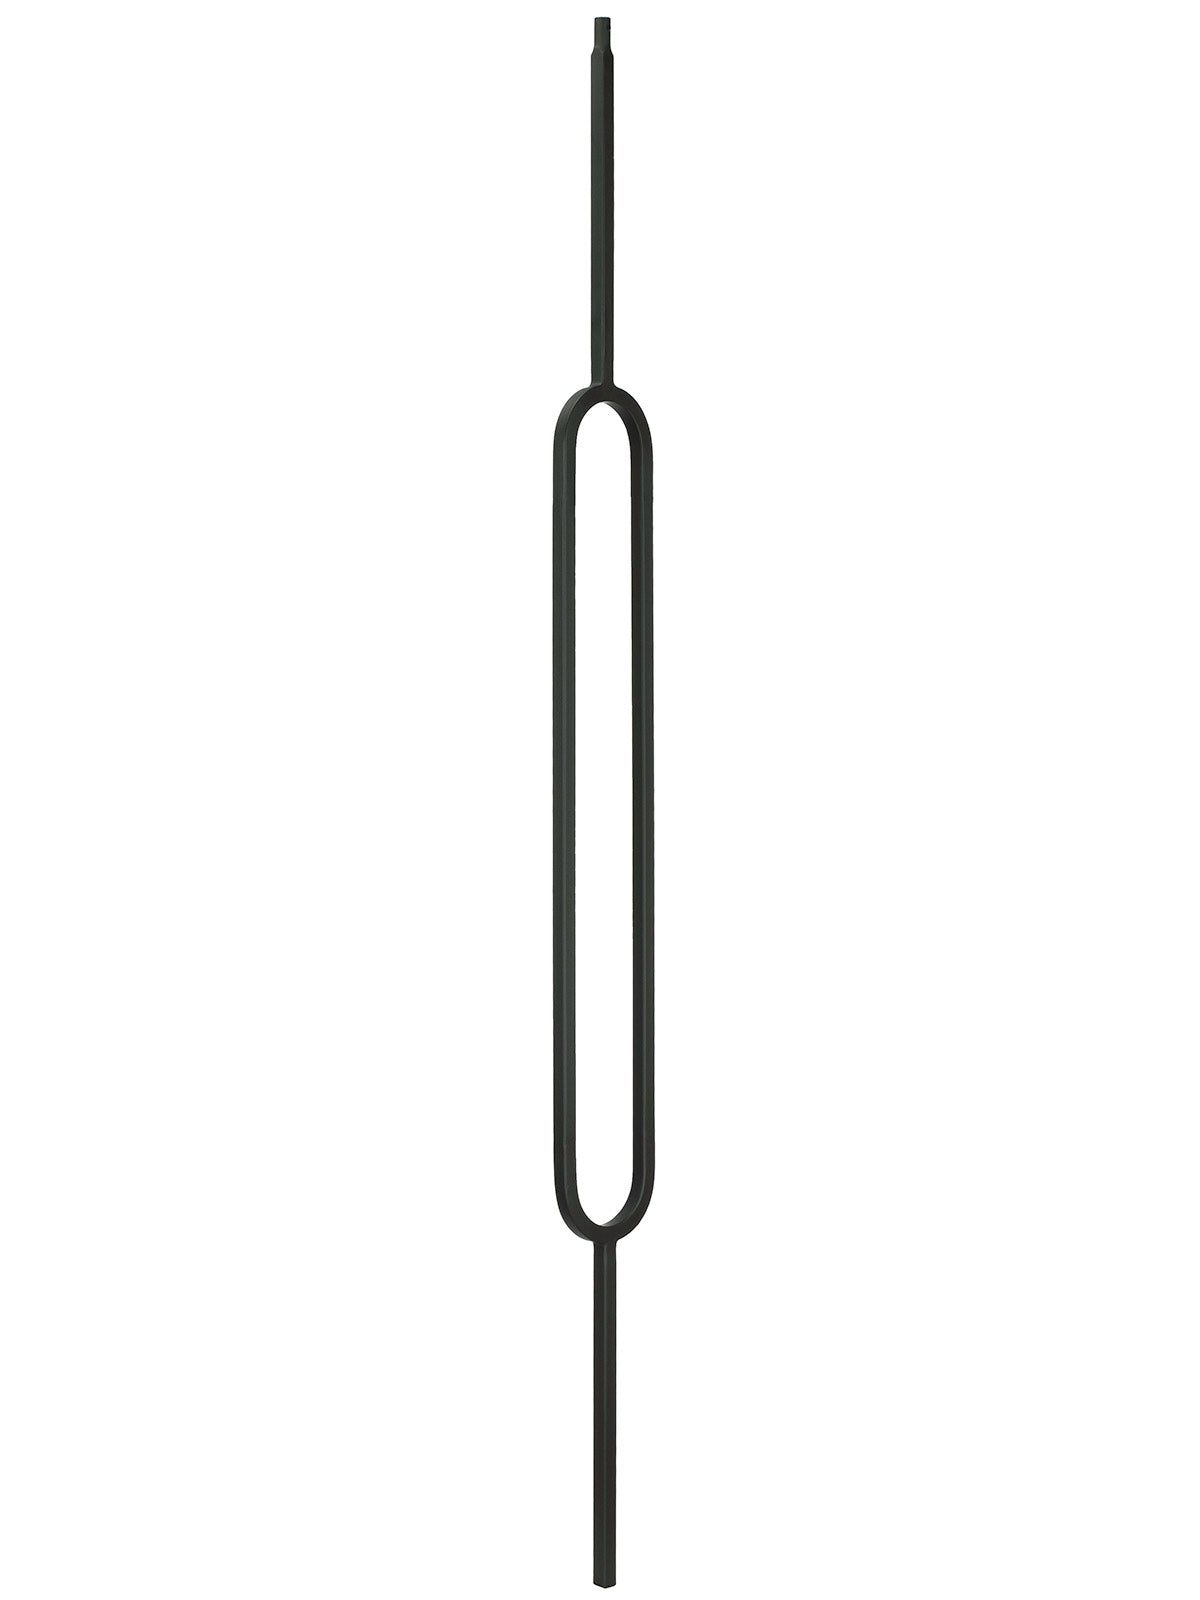 Iron Baluster 9088XL - 1/2" Square - 24" Contemporary Oval